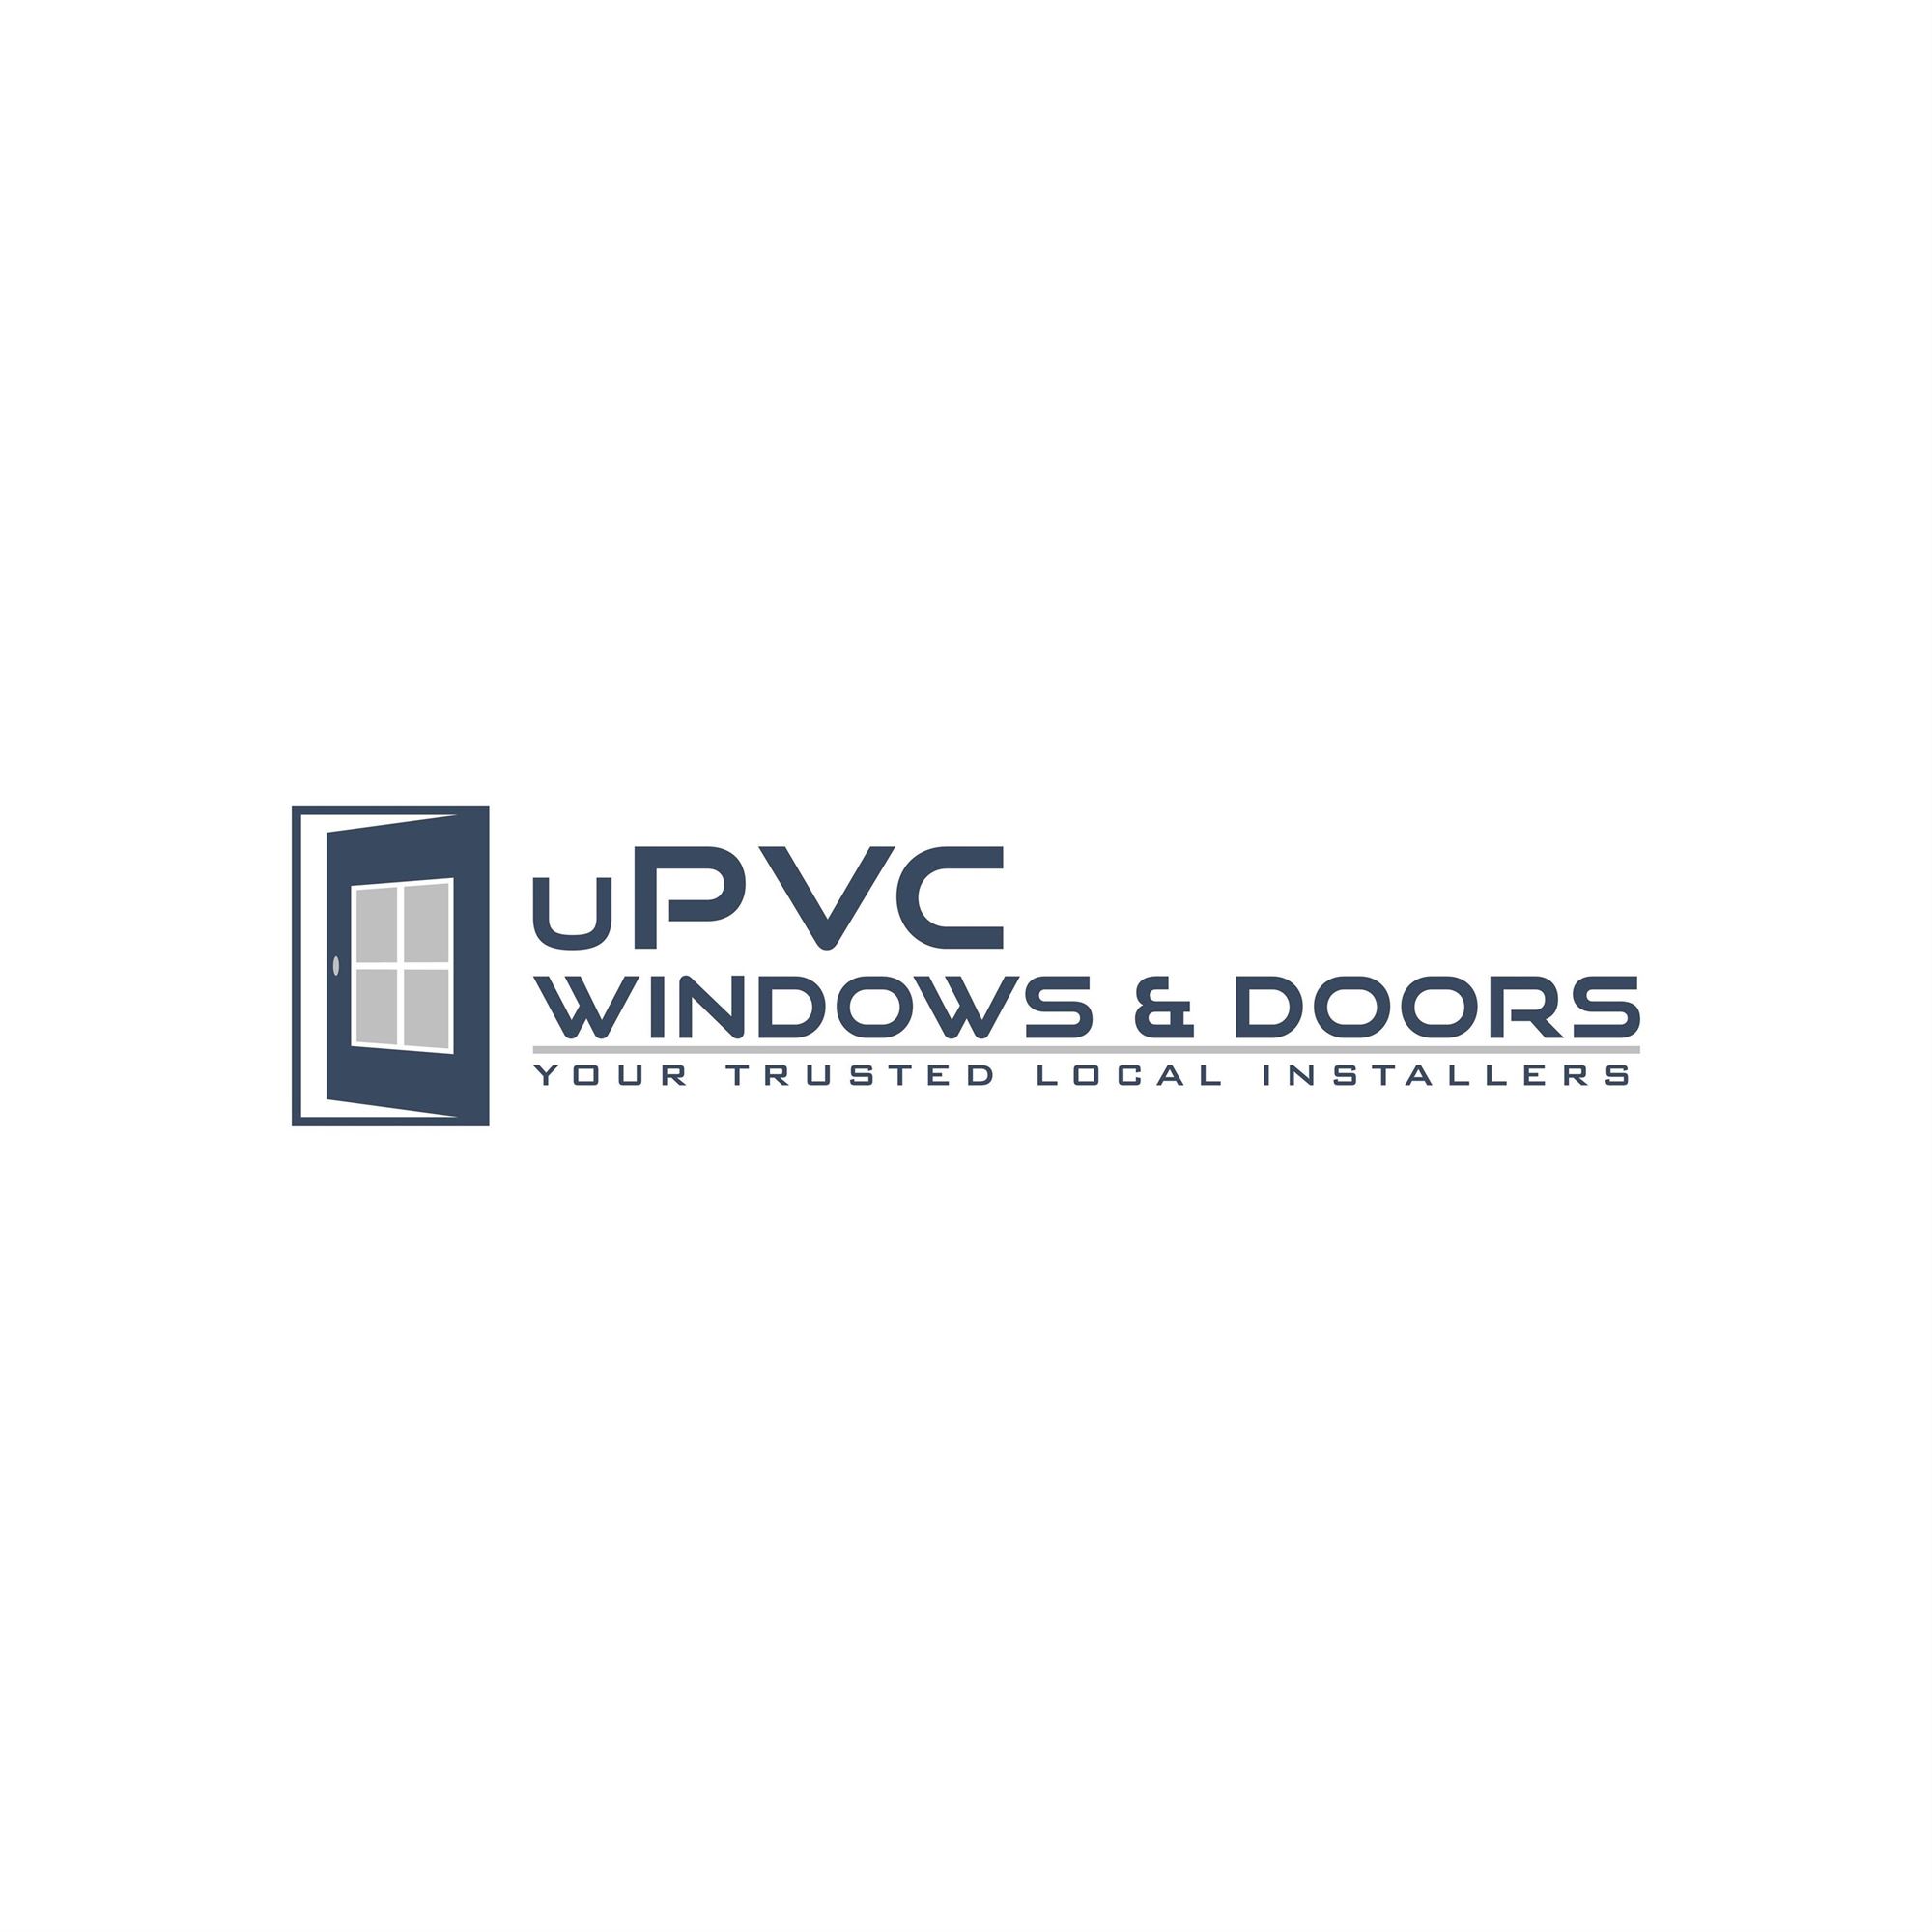 uPVC Windows & Doors Margate has Launched a New Website for the Residents of Margate